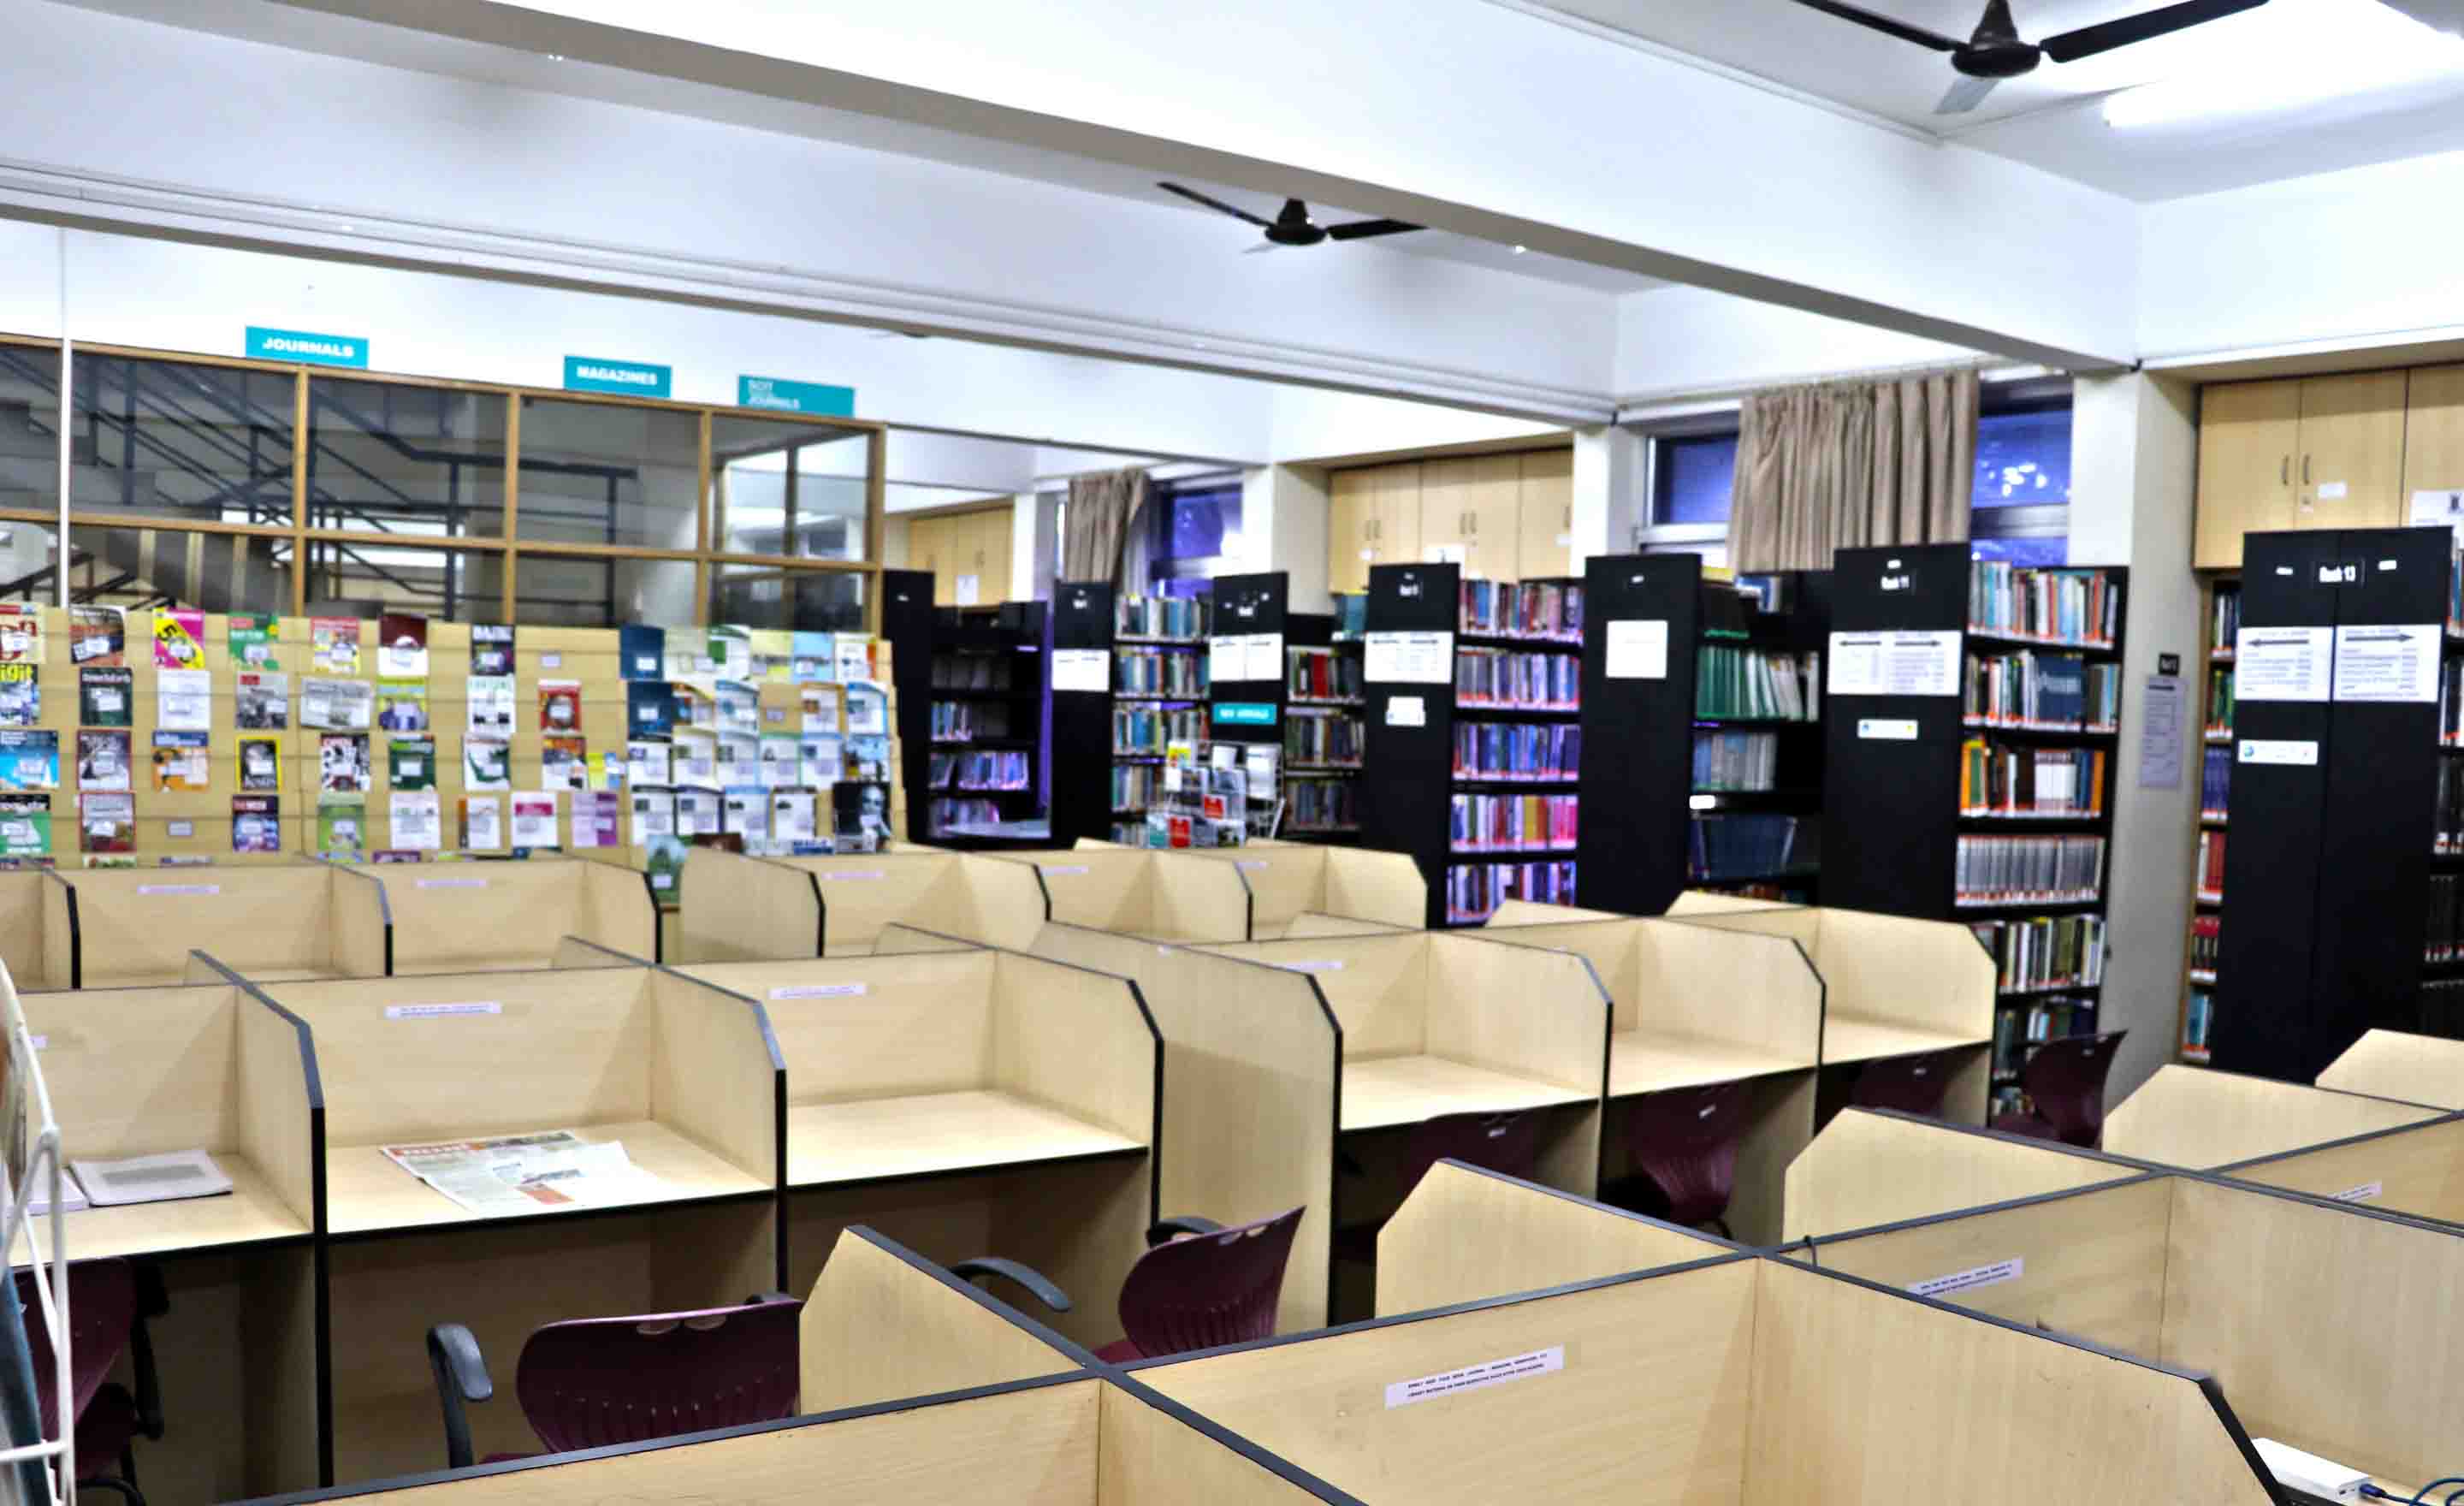 Library of SCIT Pune